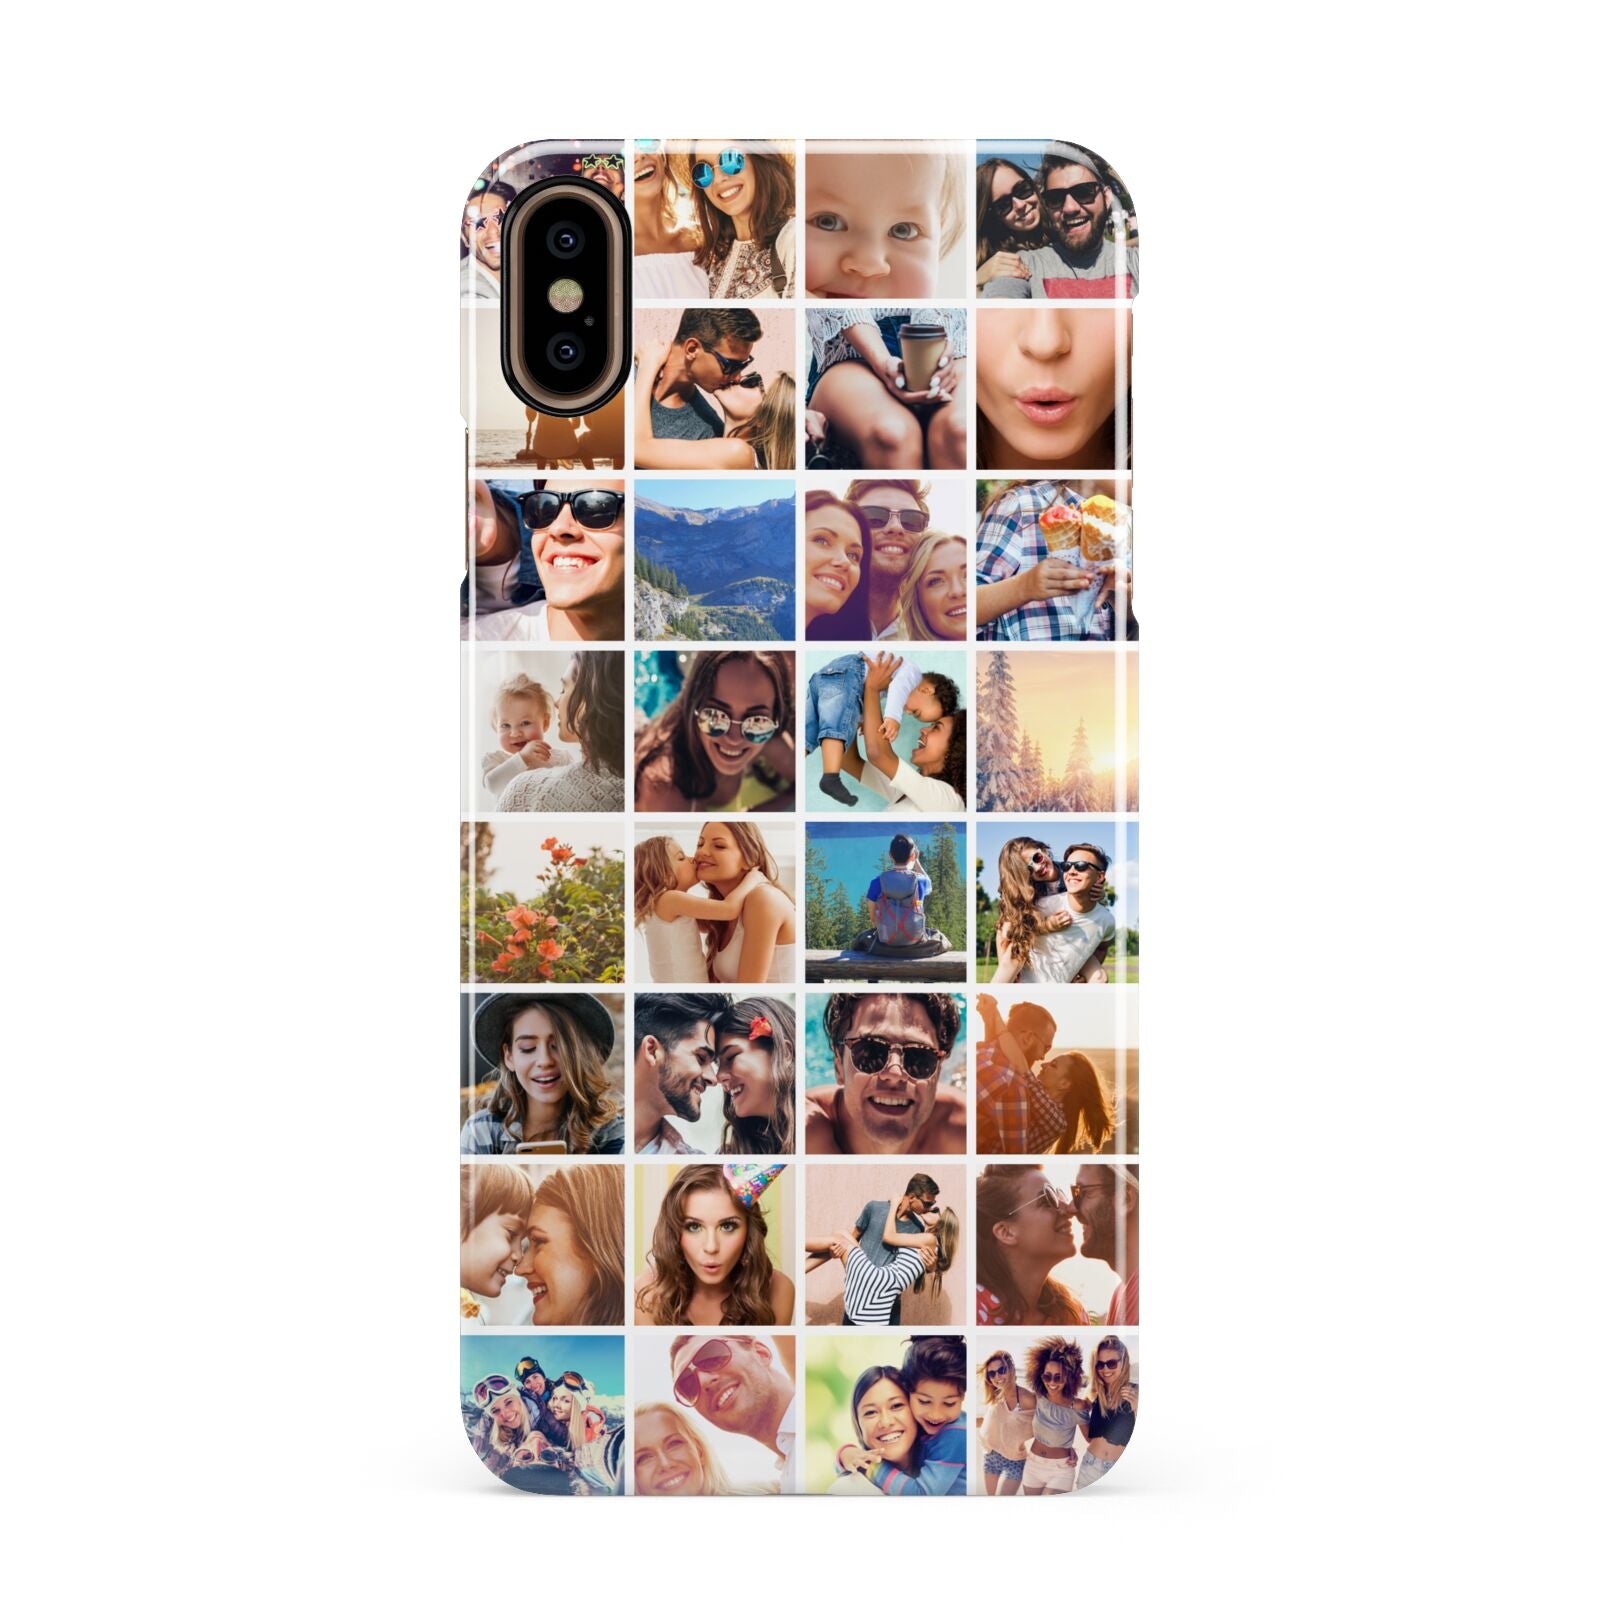 Ultimate Photo Montage Upload Apple iPhone Xs Max 3D Snap Case